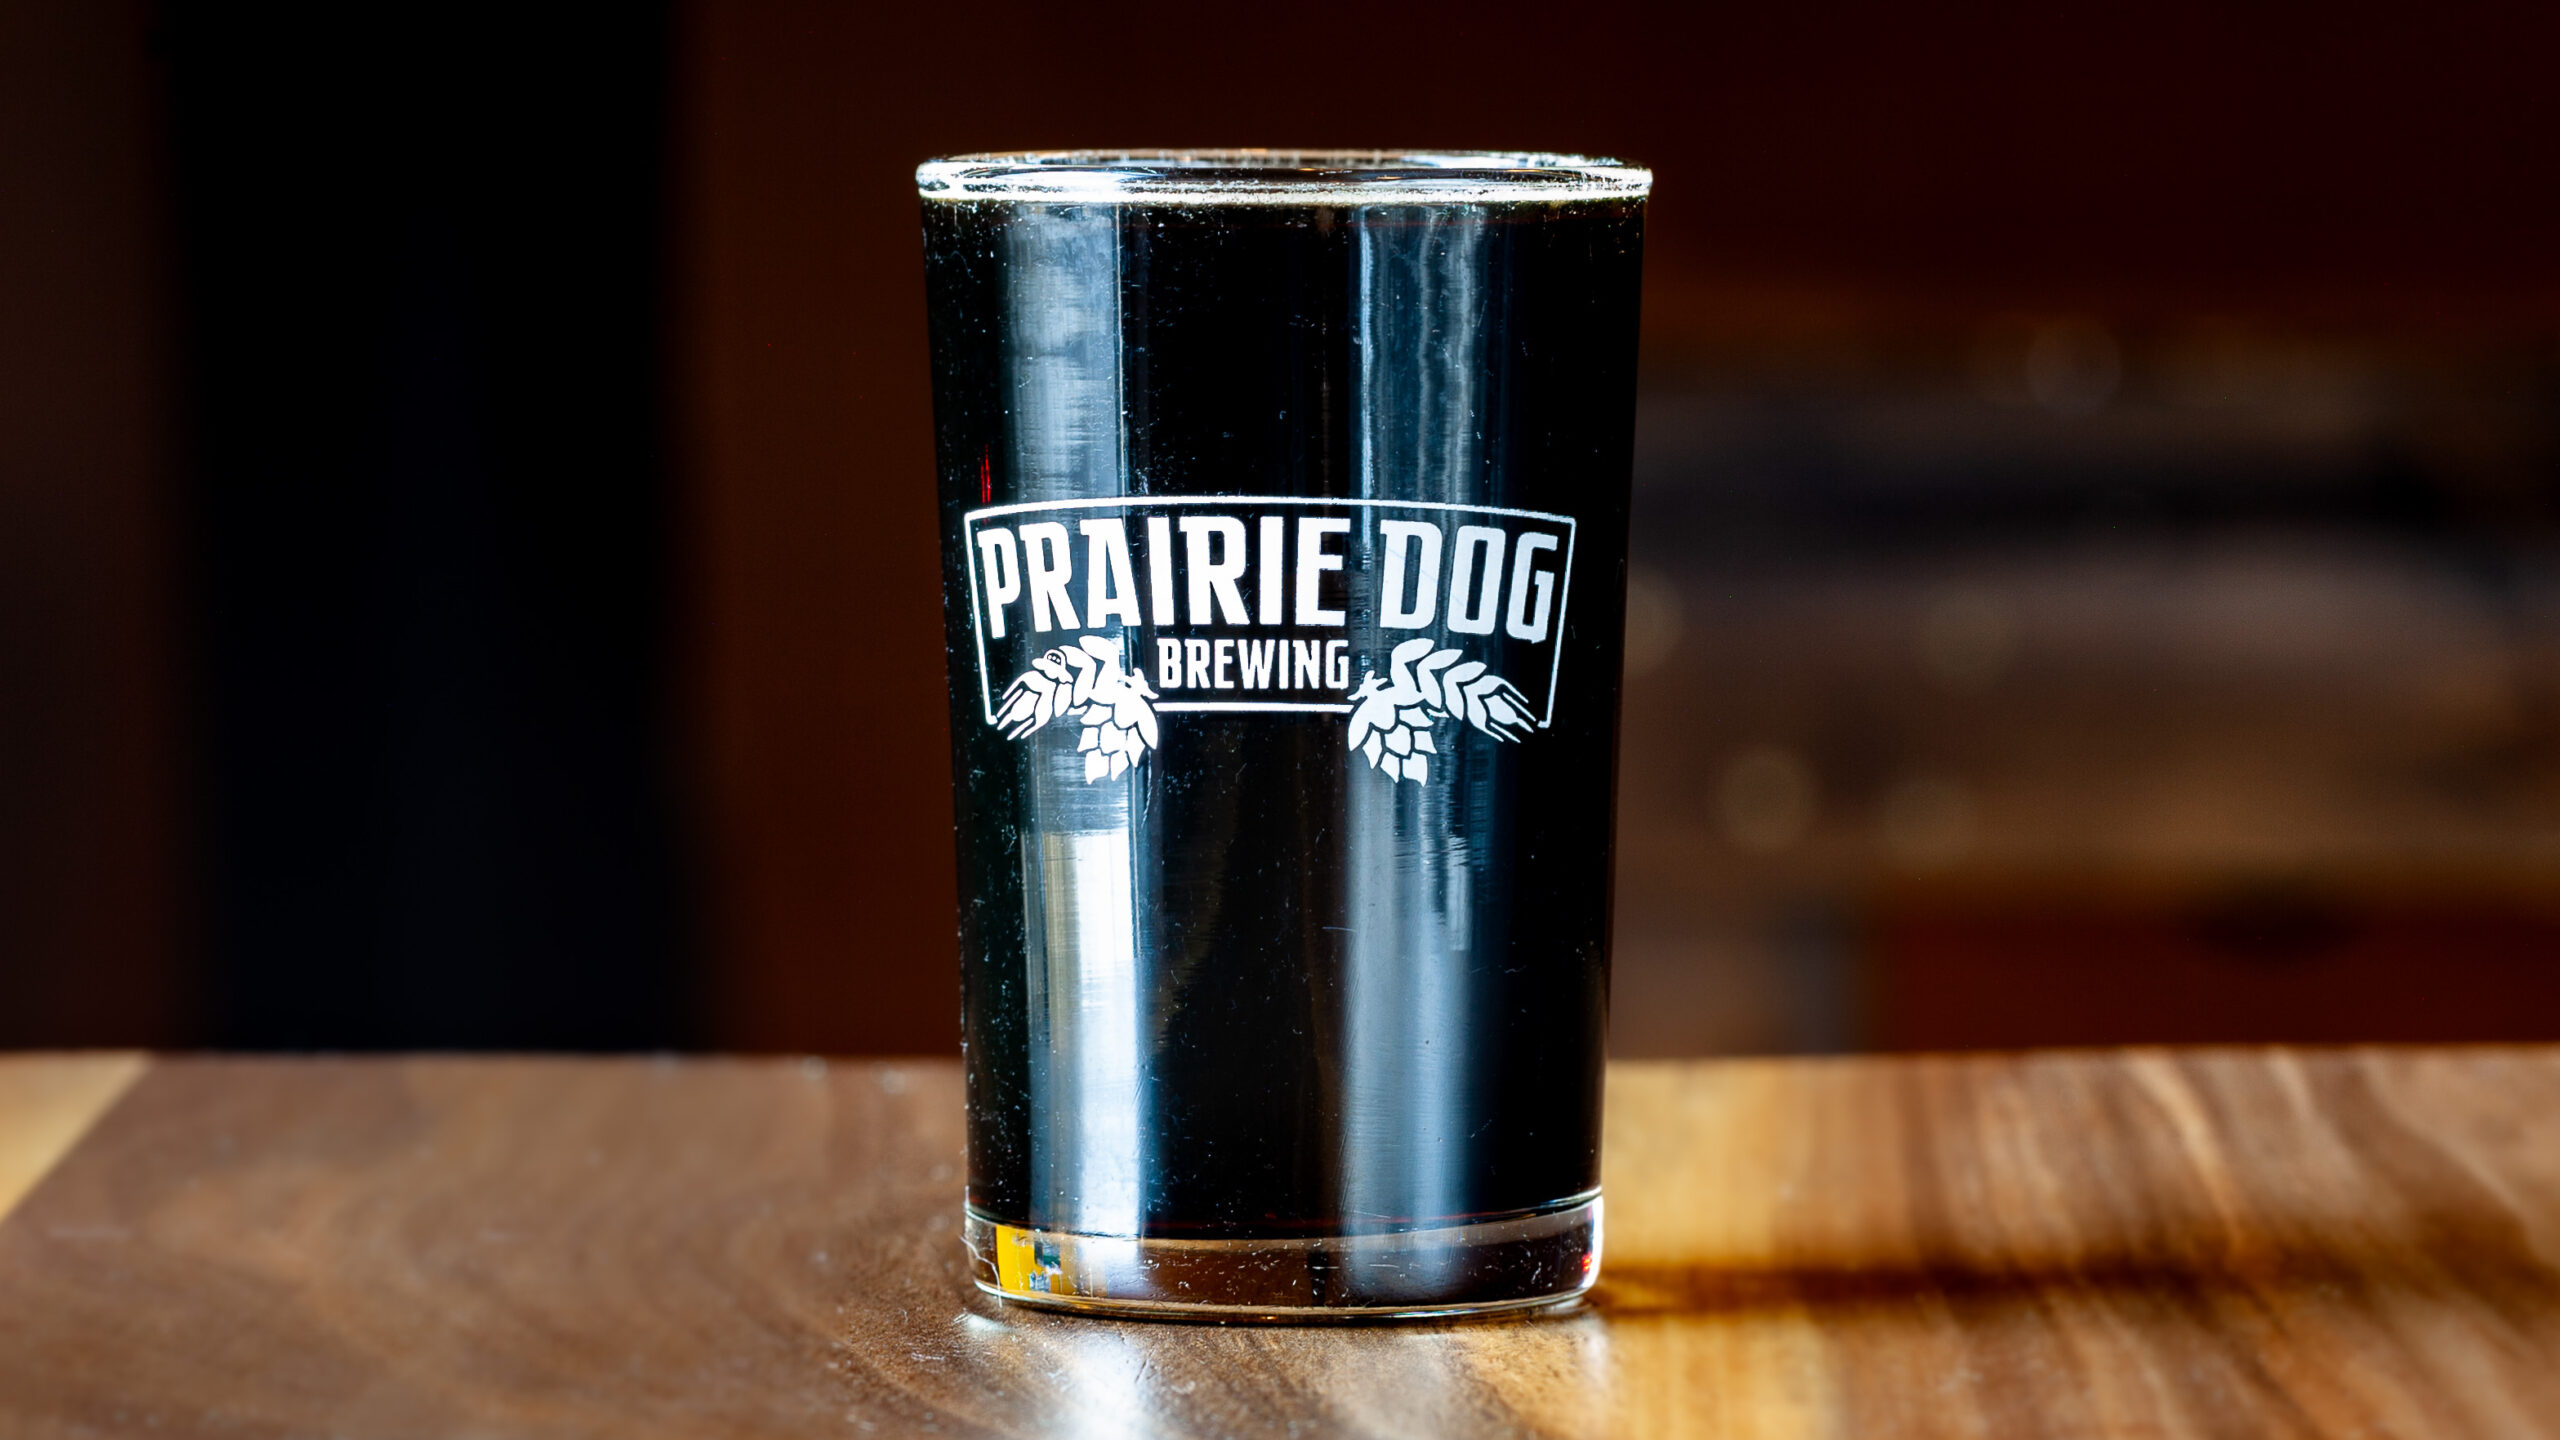 A 150mL draft pour of Prairie Dog Brewing's Wholly Mole Chocolate Stout